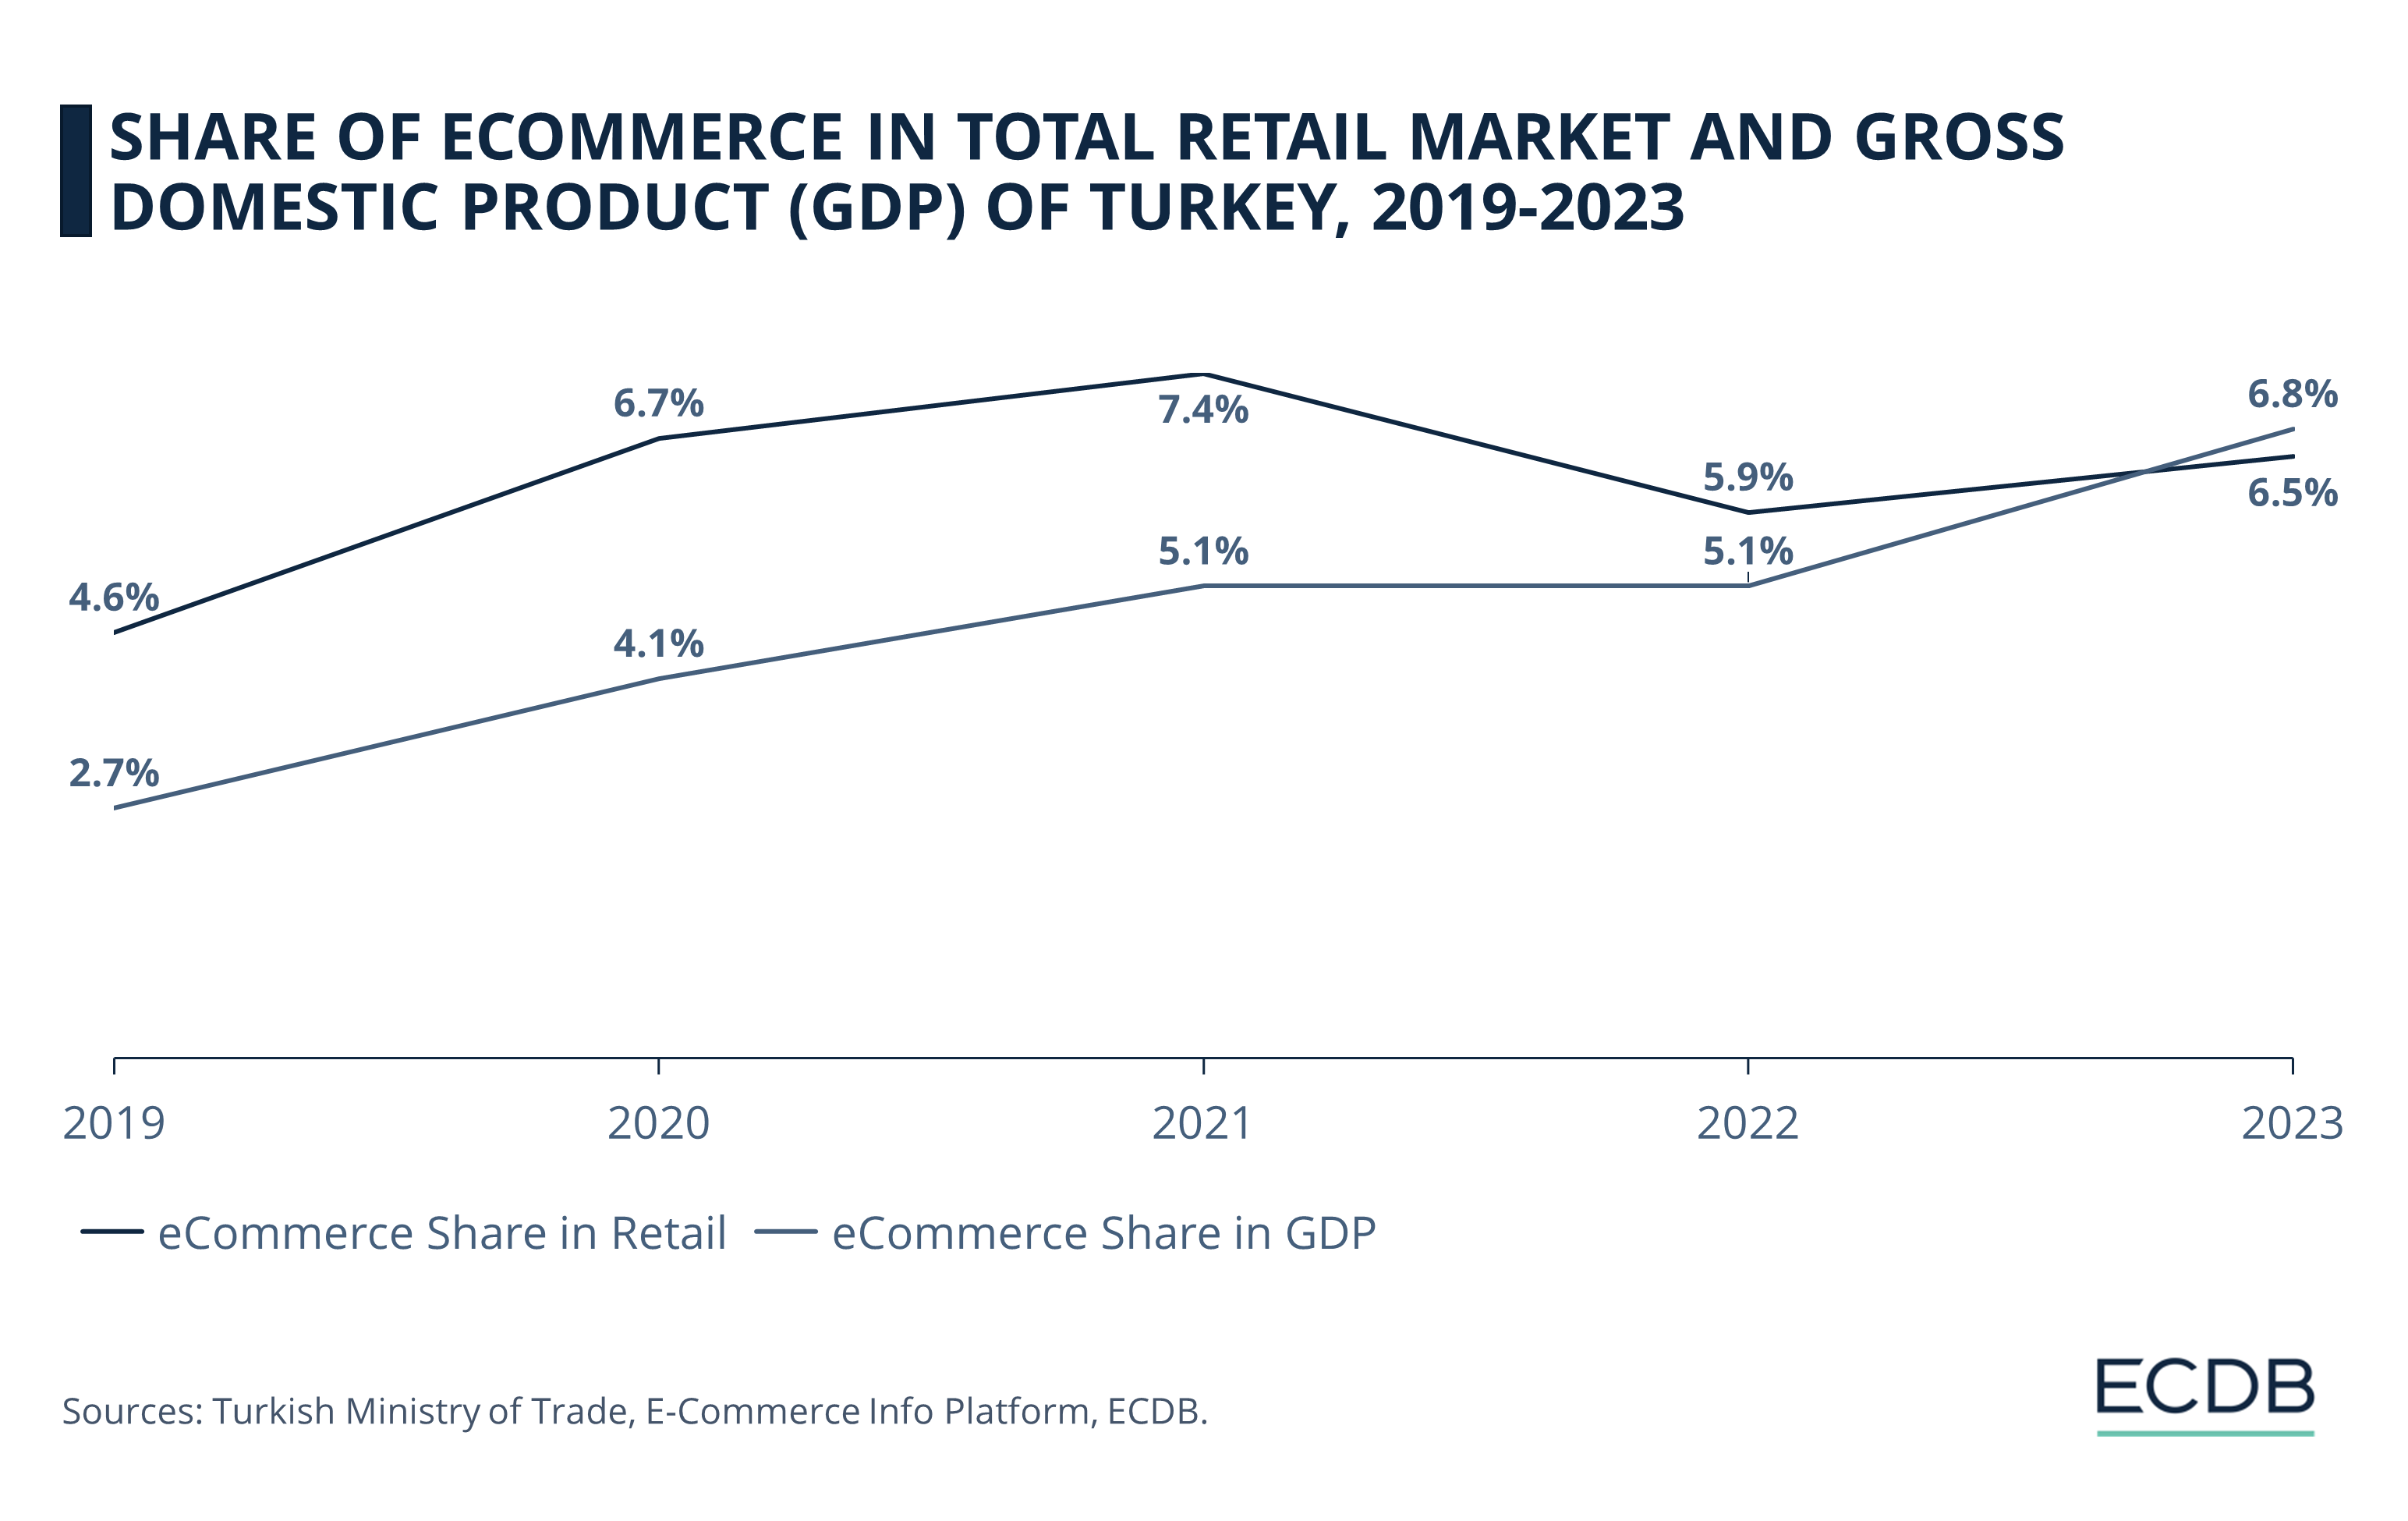 Share of eCommerce in Total Retail Market and Gross Domestic Product (GDP) of Turkey, 2019-2023